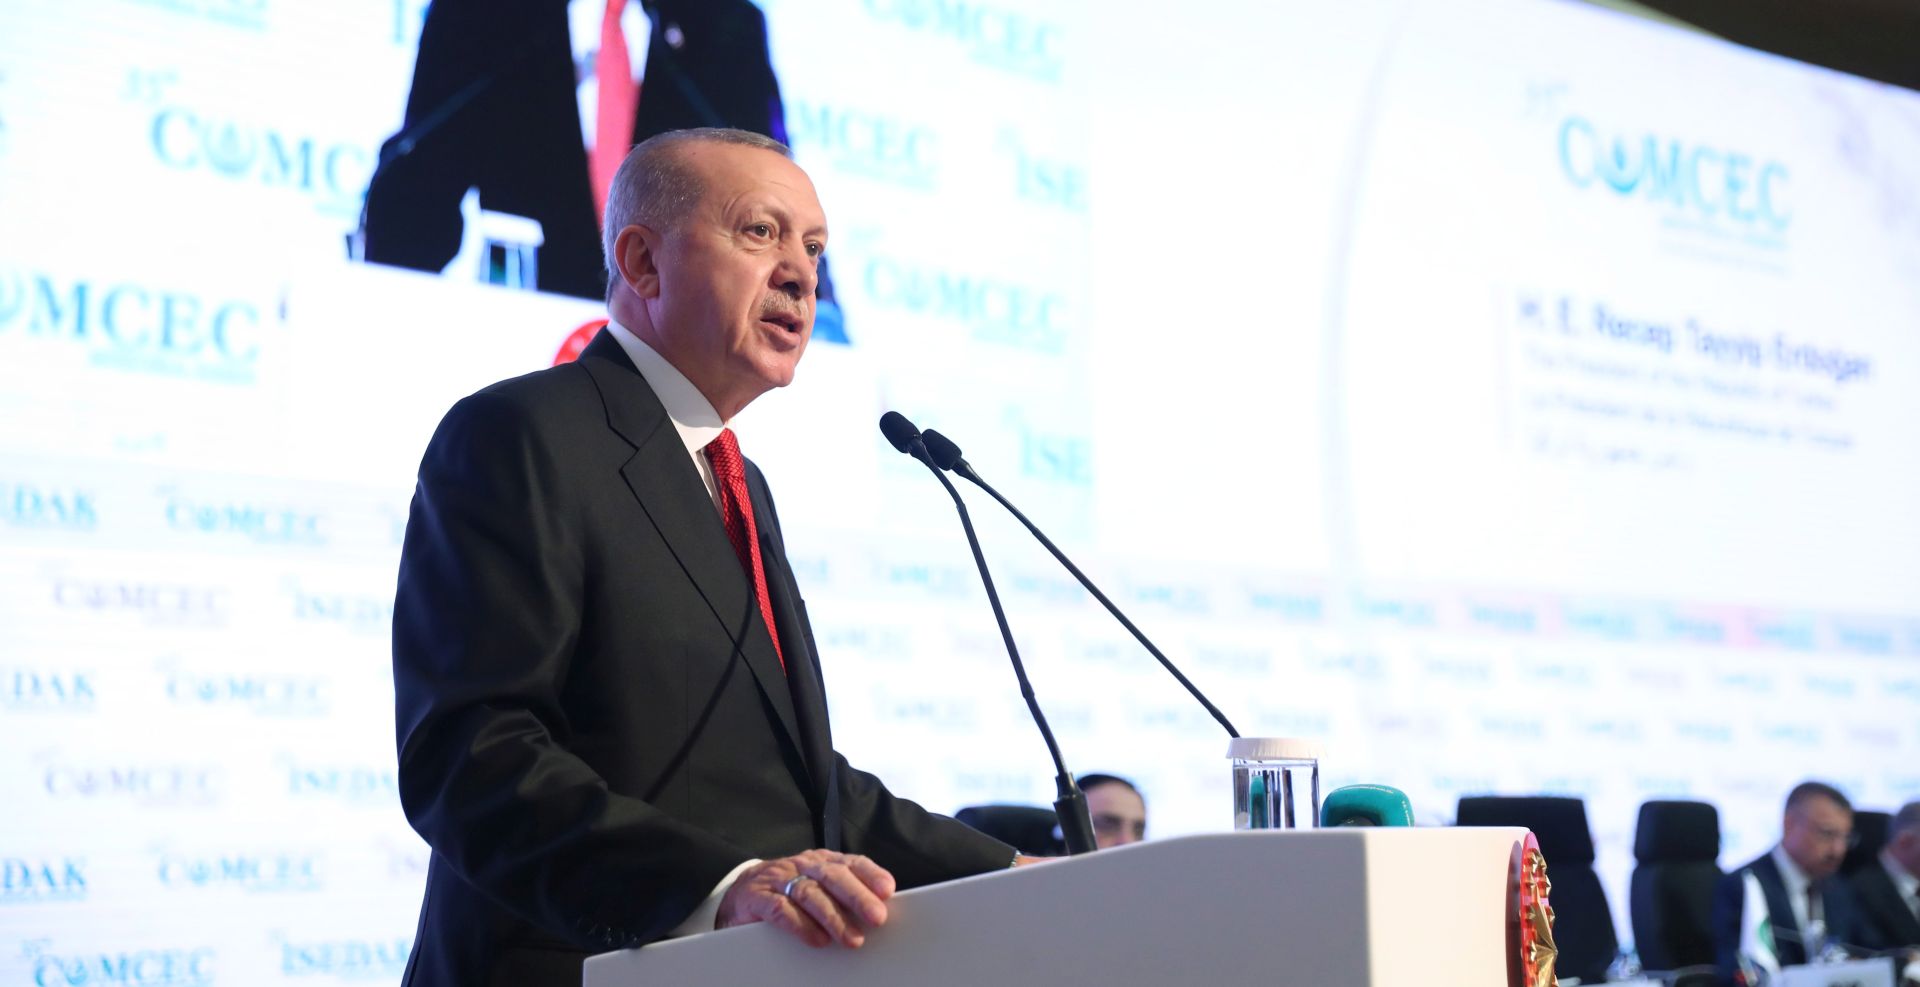 epa08028372 A handout photo made available by the Turkish President Press Office shows Turkish President Recep Tayyip Erdogan addressing the opening session of the 35th session of the Standing Committee for Economic and Commercial Cooperation of the Organization of the Islamic Conference
(COMCEC) in Istanbul, Turkey, 27 November 2019.  EPA/TURKISH PRESIDENT PRESS OFFICE/ MUSTAFA KAMACI HANDOUT  HANDOUT EDITORIAL USE ONLY/NO SALES